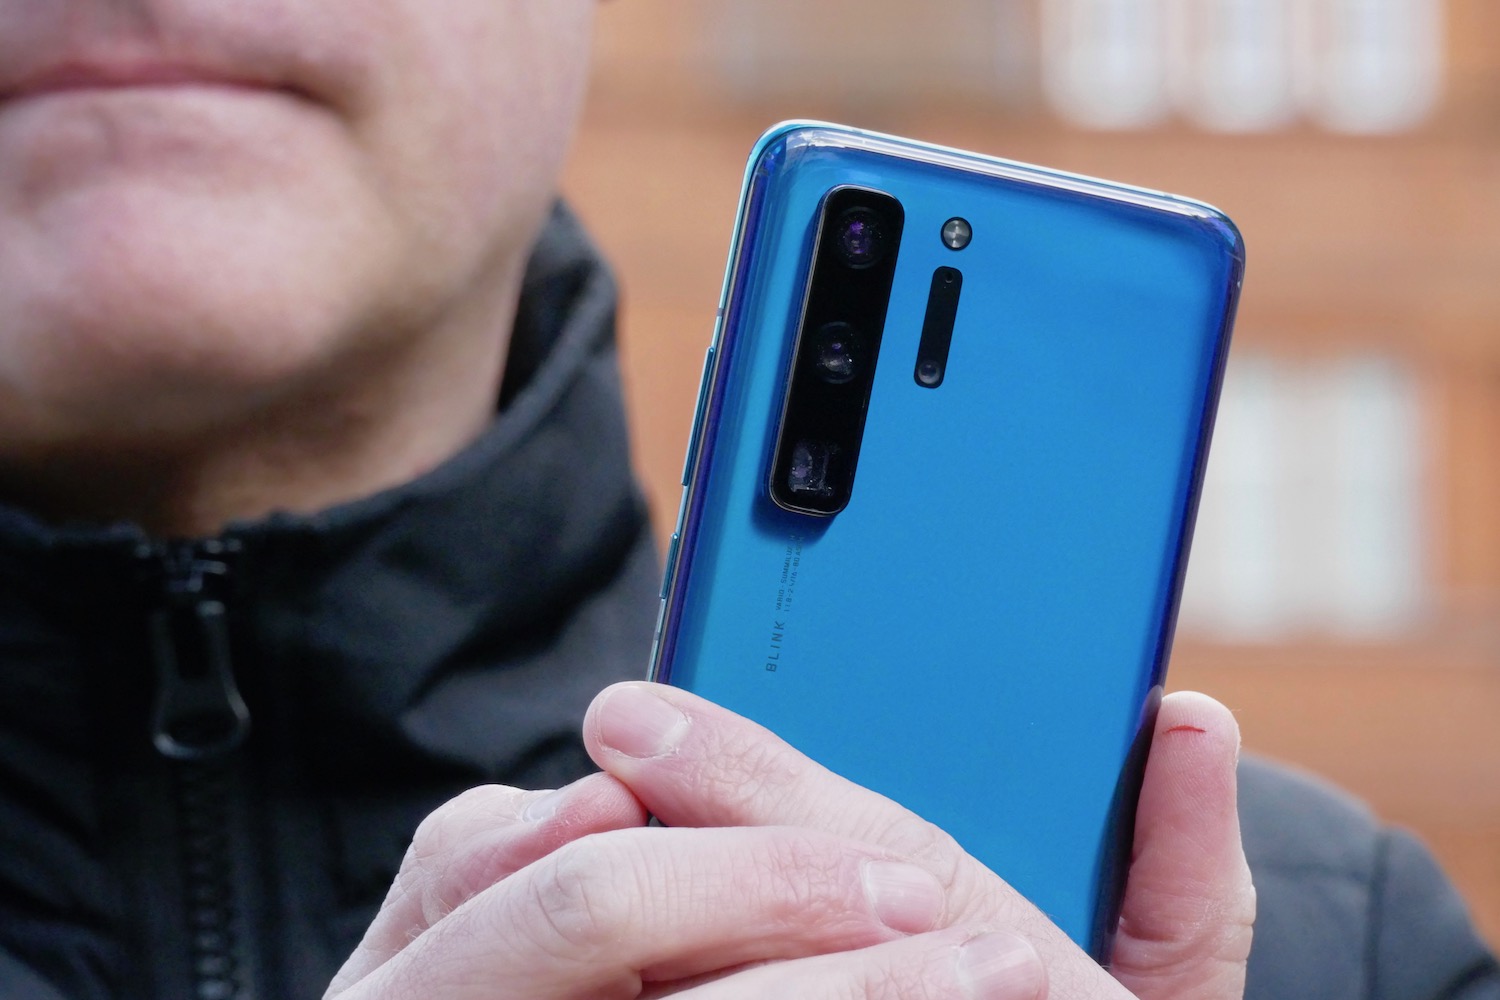 Huawei P40 Pro, hands on: Another superb Huawei phone, but still